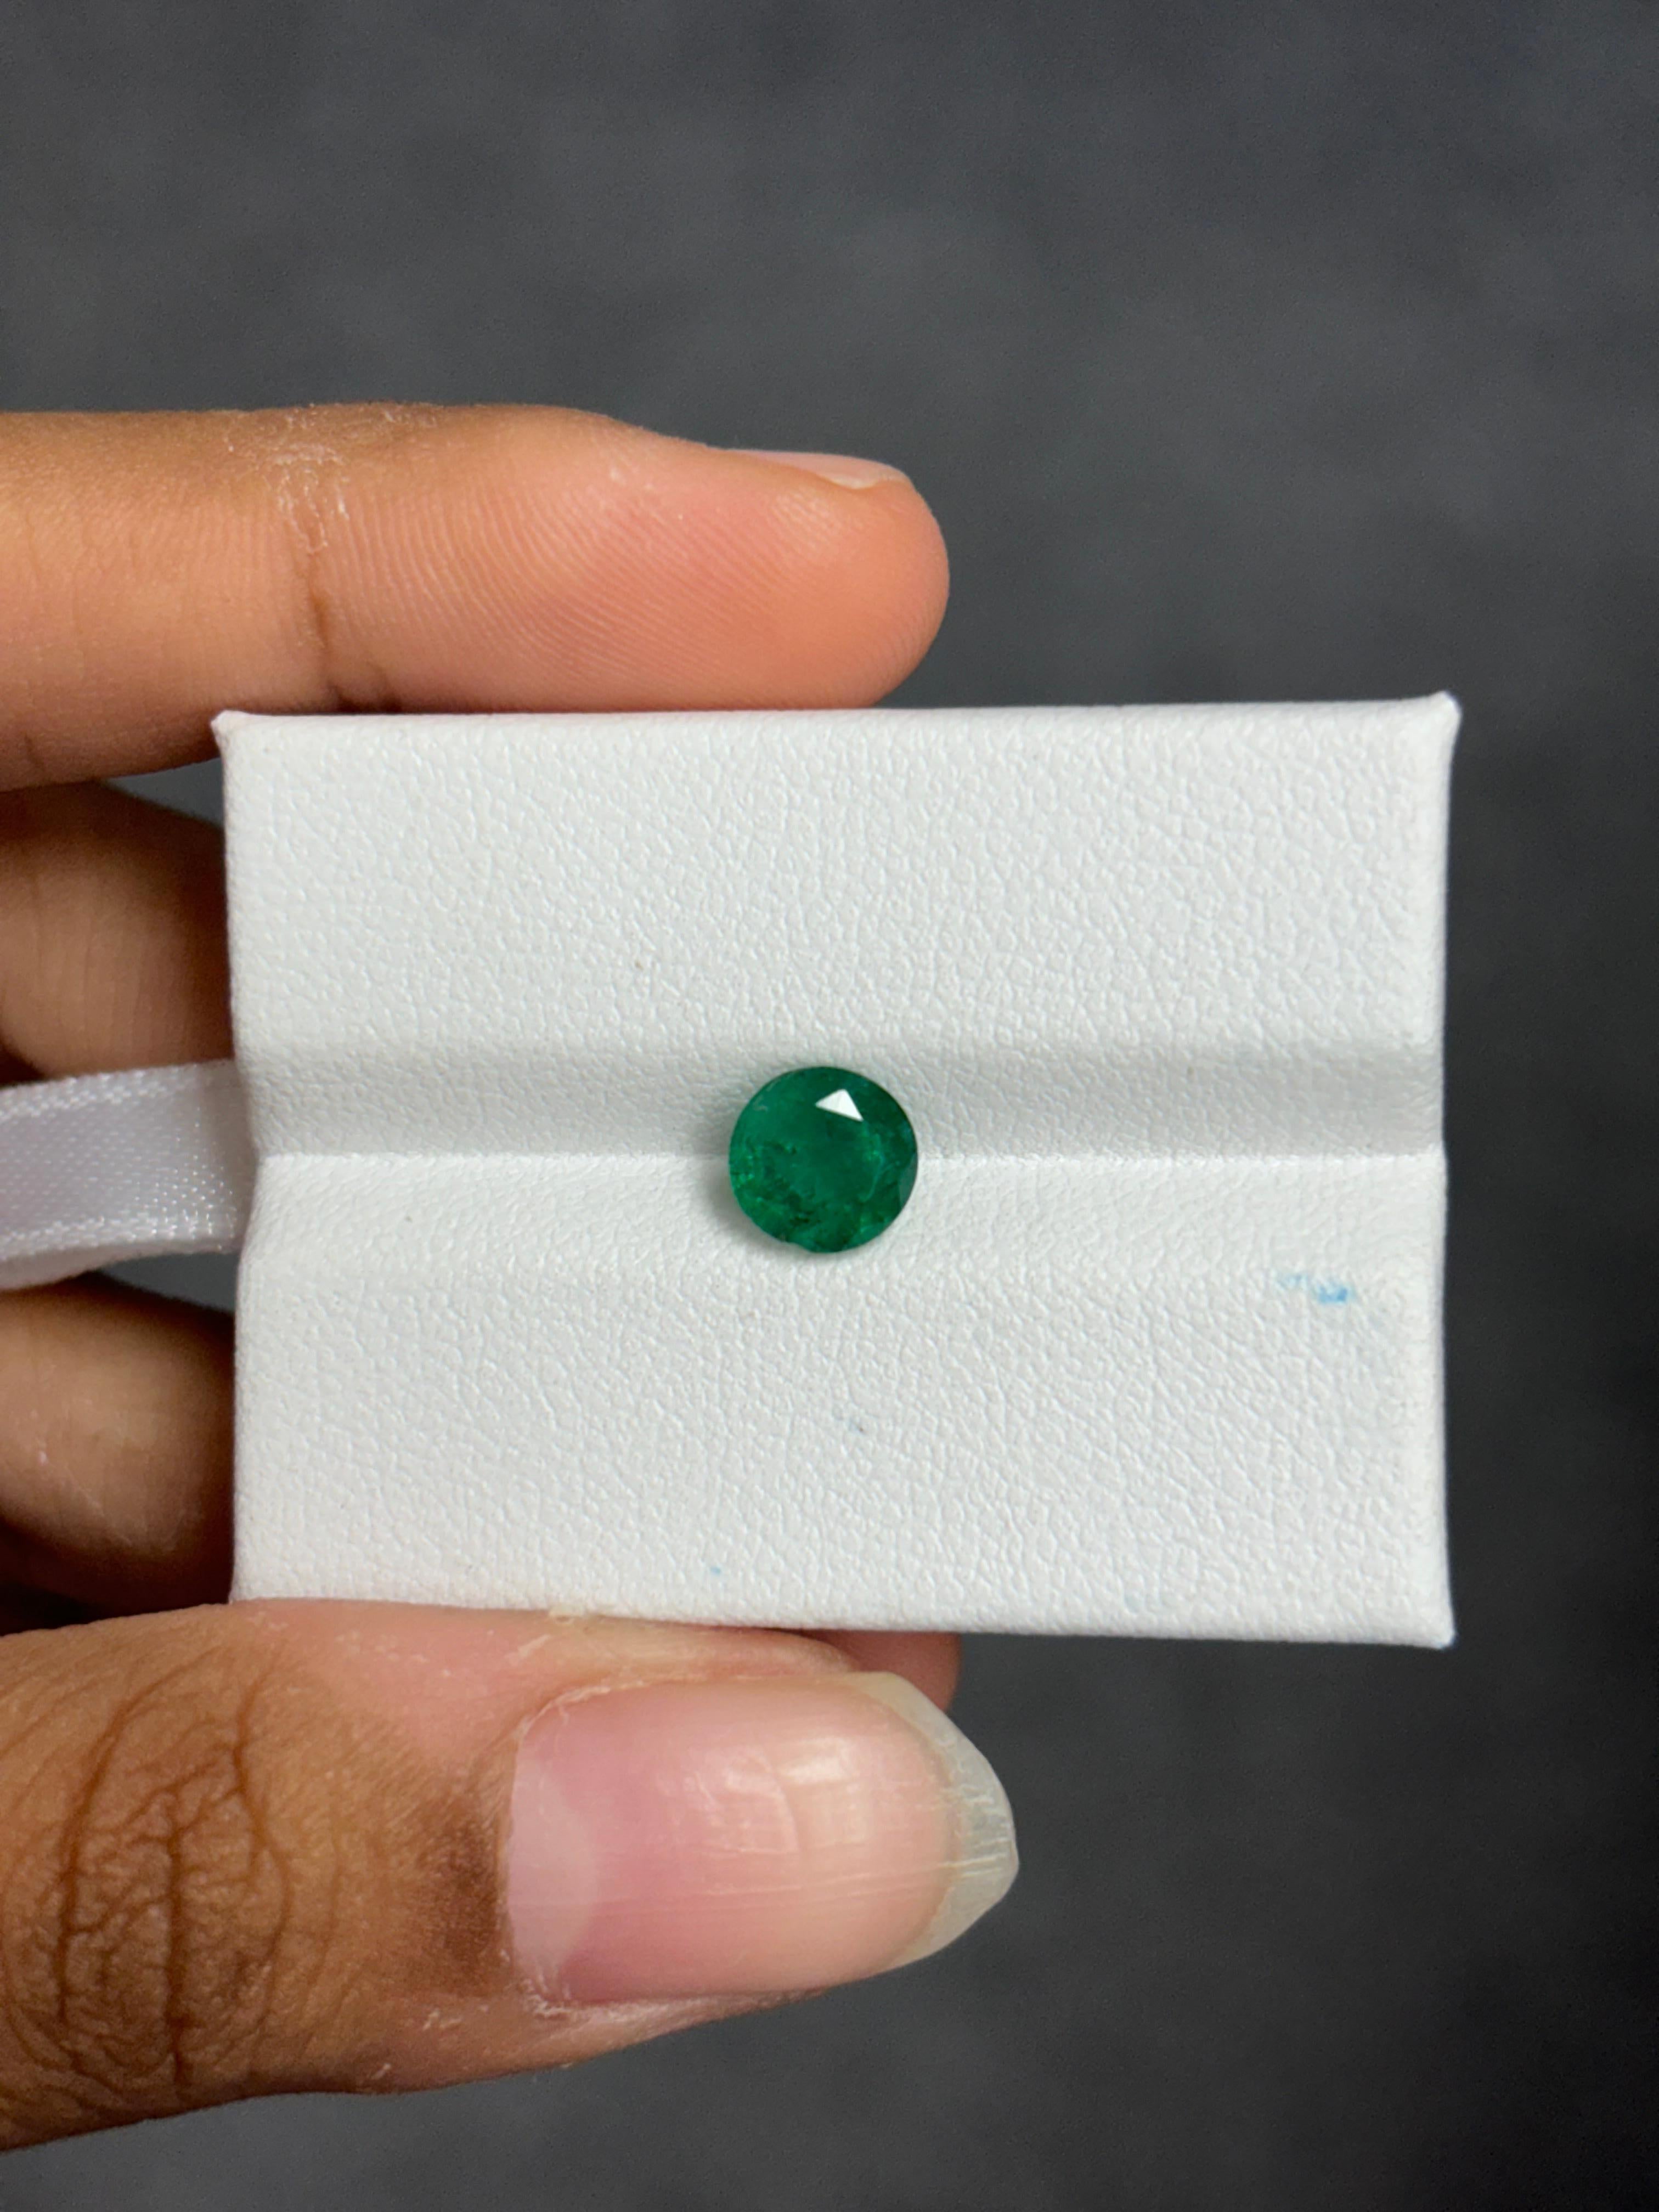 A stunning 1.09 Carat Emerald stone that is a gorgeous shade of vivid green and originates from Zambia. It is completely natural and of good quality. The emerald piece is cut into perfection in a round-cut shape.

The green emerald has only